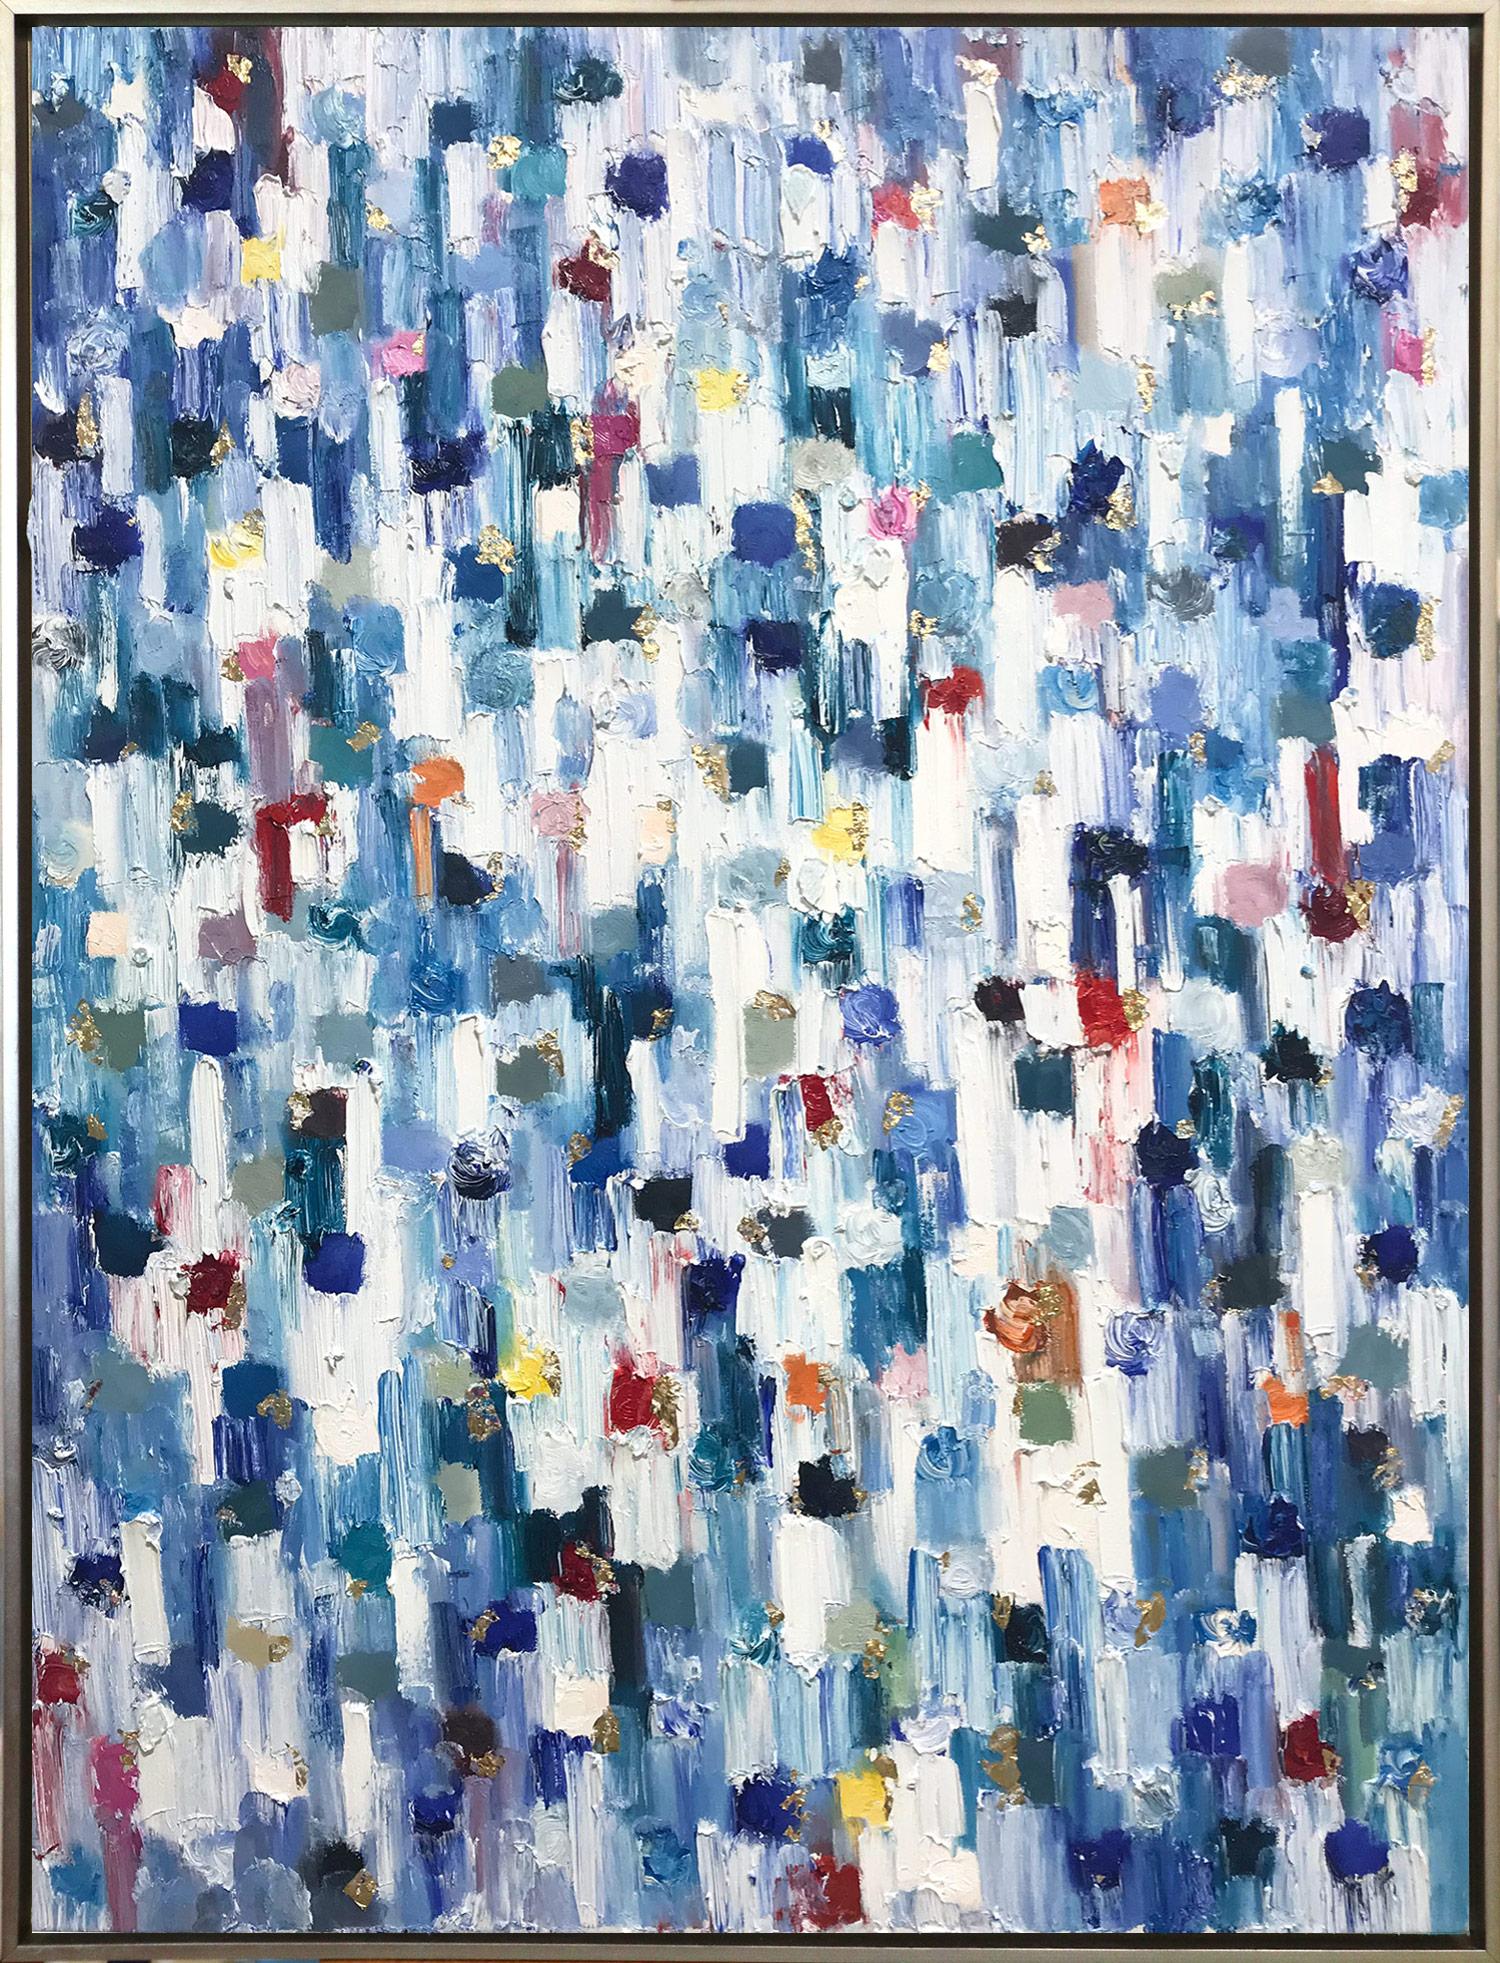 Cindy Shaoul Abstract Painting – "Dripping Dots - Saint-Tropez" Colorful Abstract Oil Painting on Canvas